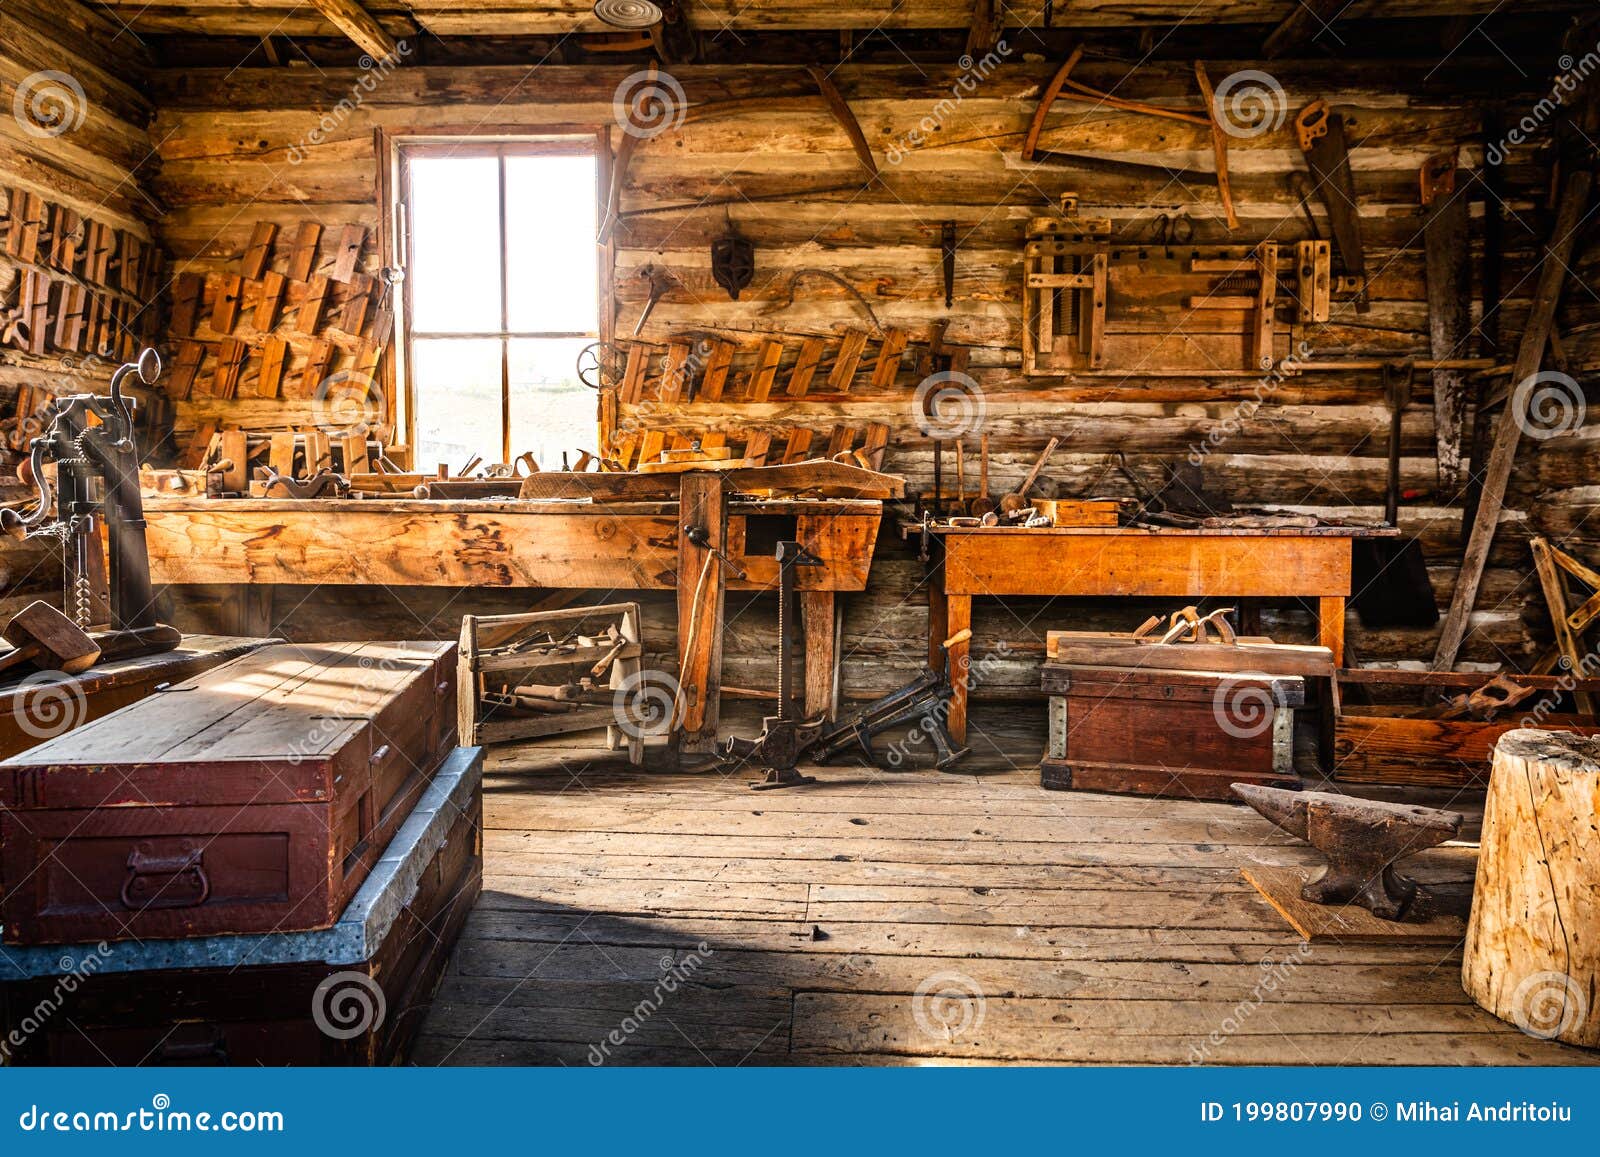 17 154 Carpenter Shop Photos Free Royalty Free Stock Photos From Dreamstime